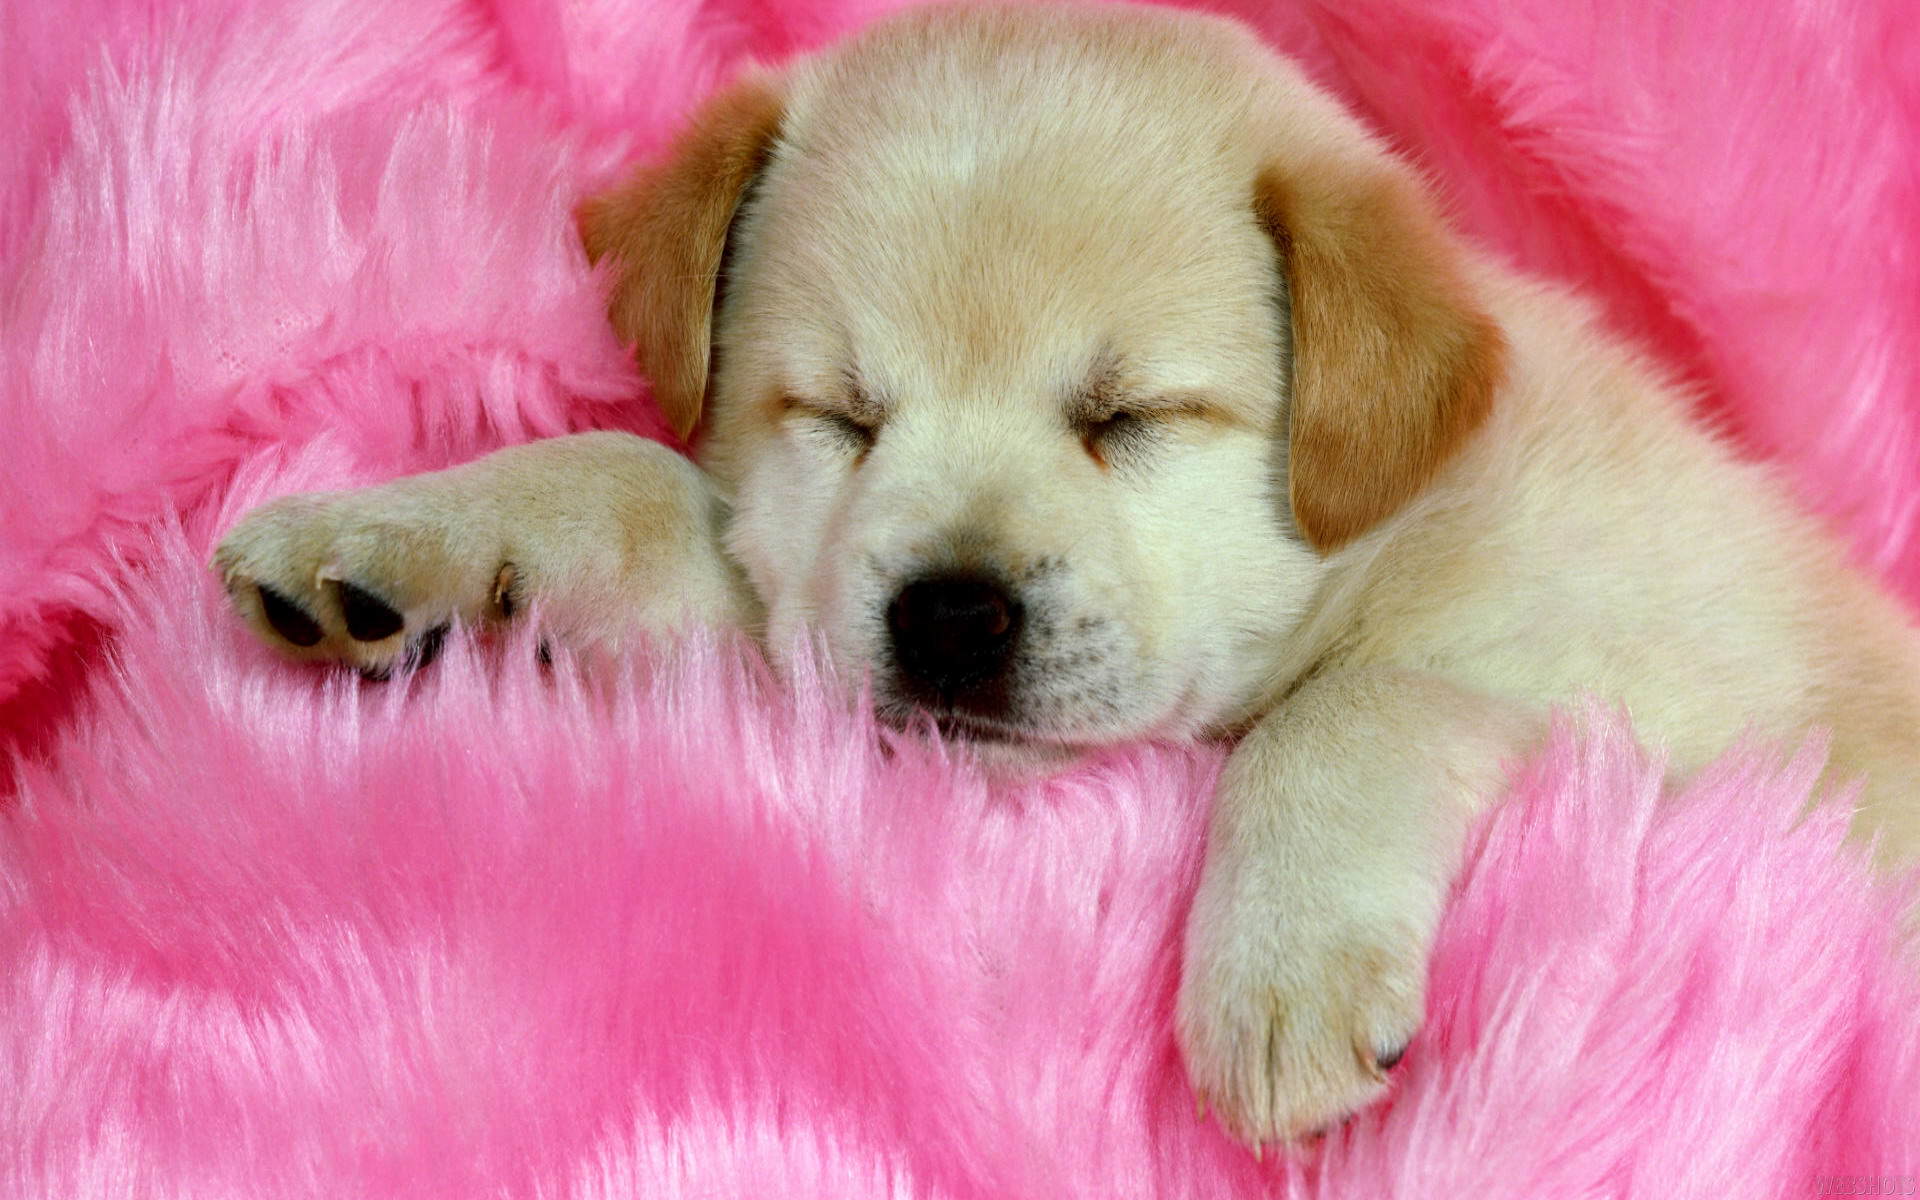 Puppy cute puppies photos free download Widescreen Wallpaper